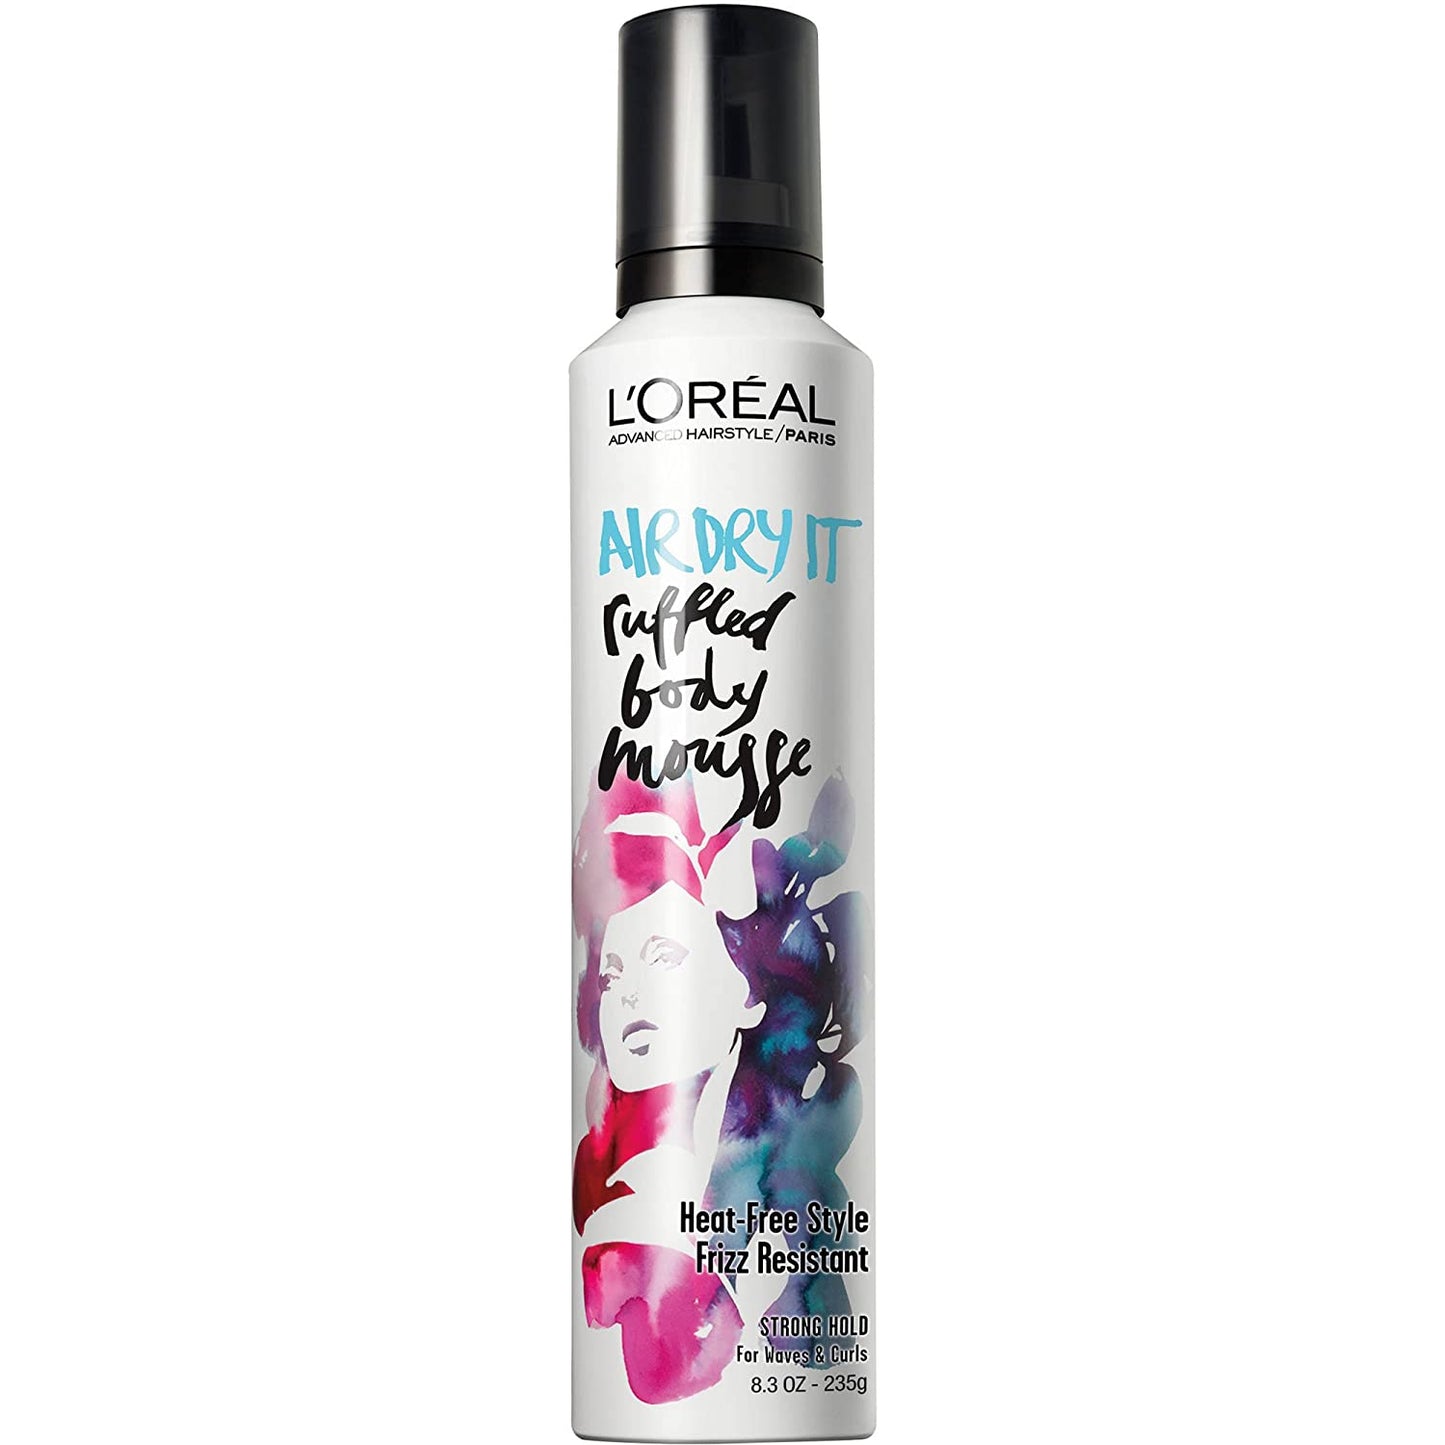 L'Oreal Air Dry It Ruffled Body Mousse